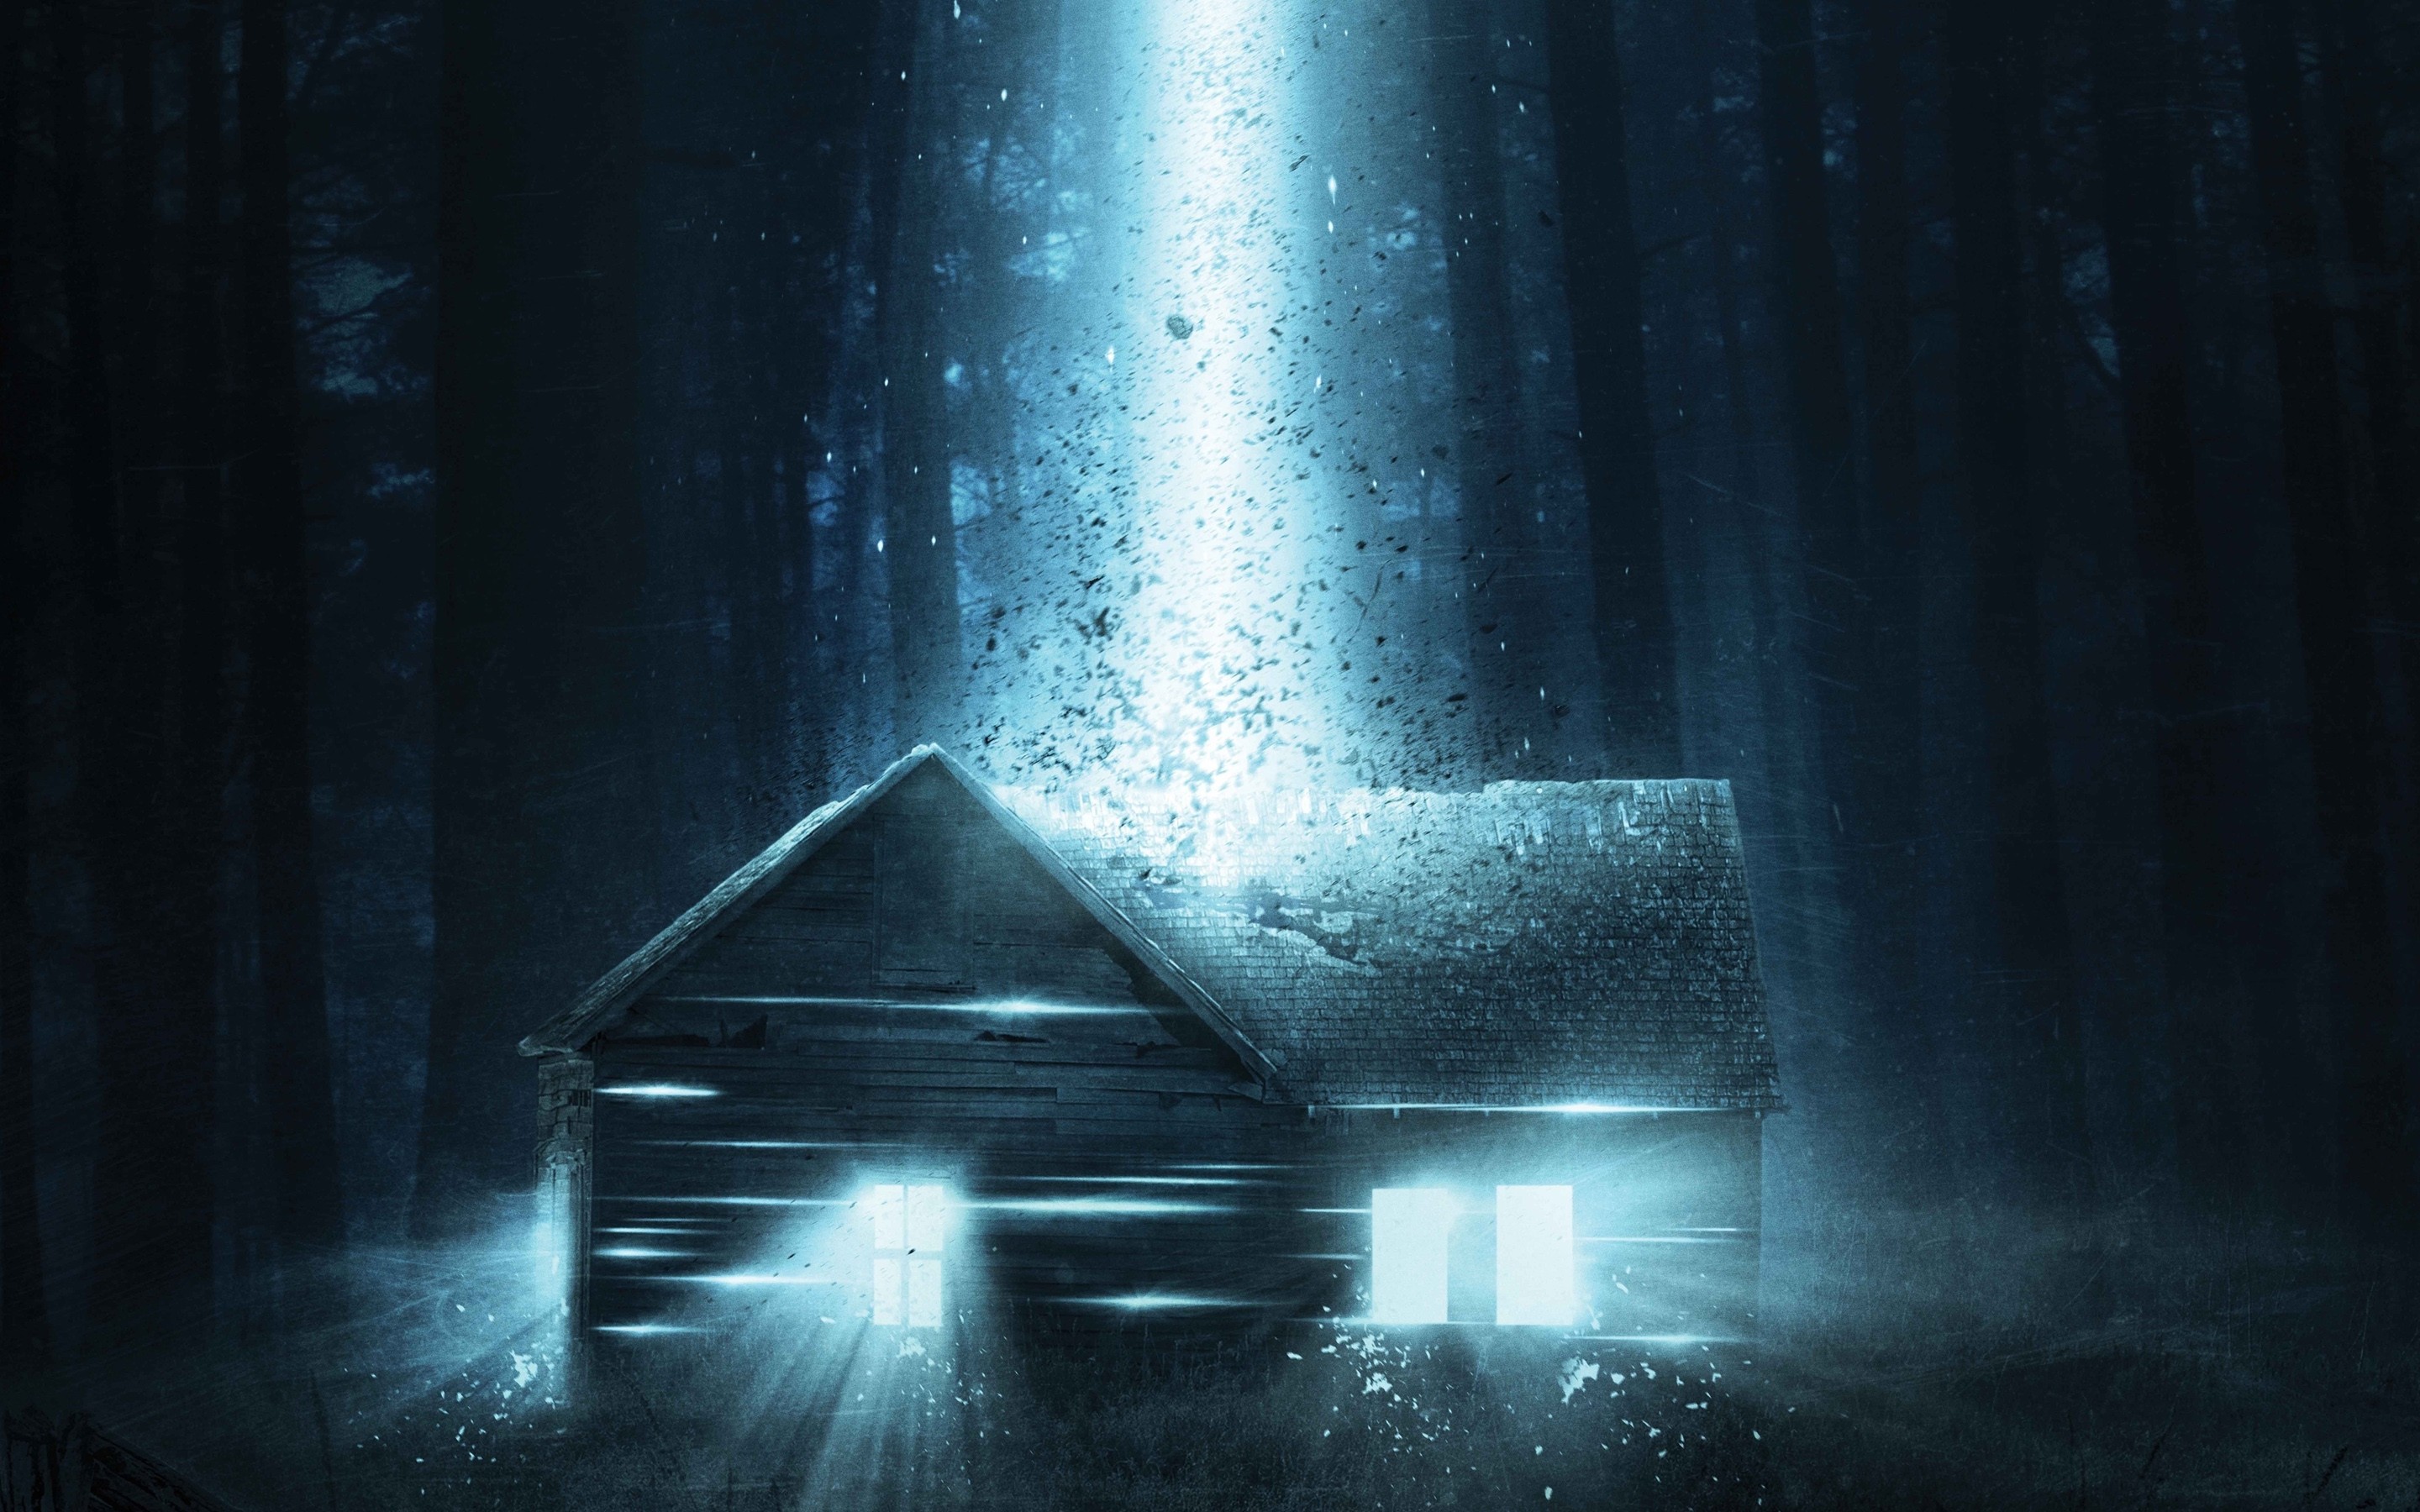 Home (2015) Wallpapers